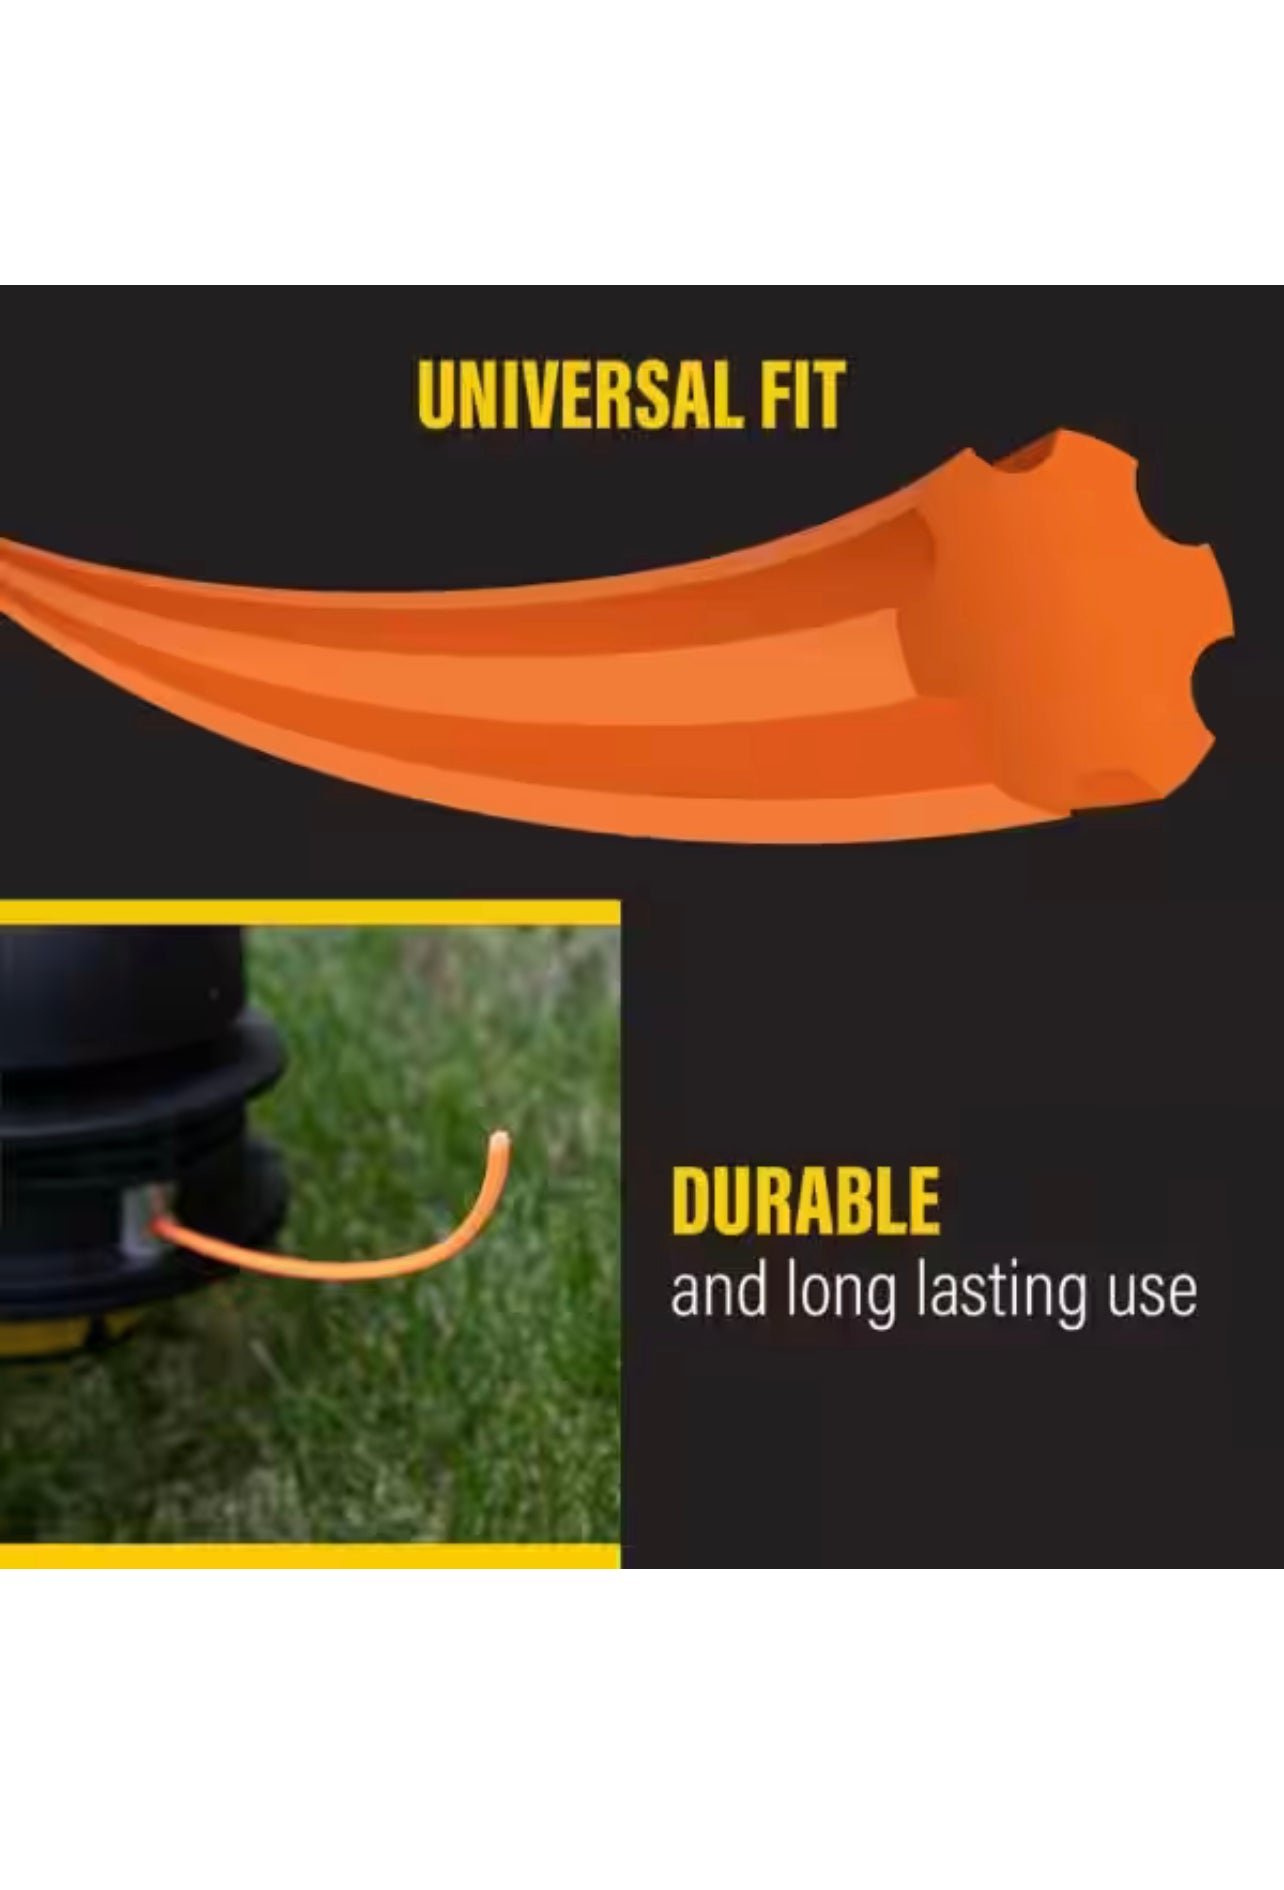 Rhino Tuff Universal Fit .095 in. x 125 ft. Gear Replacement Line for Gas and Select Cordless String Grass Trimmer Part/Lawn Edger New